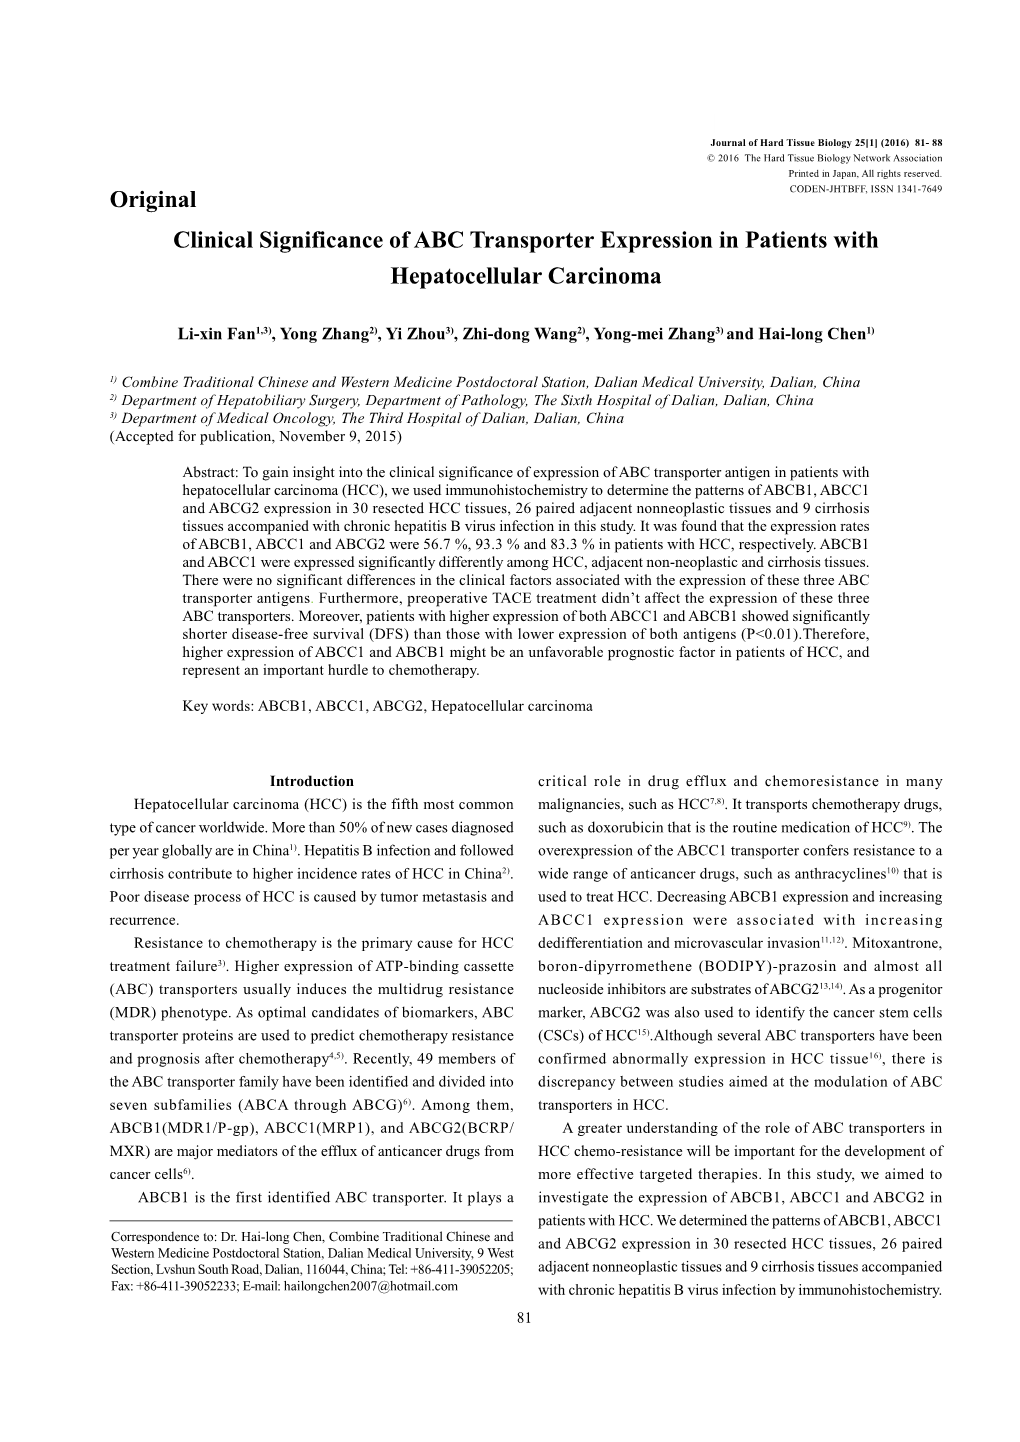 Original Clinical Significance of ABC Transporter Expression in Patients